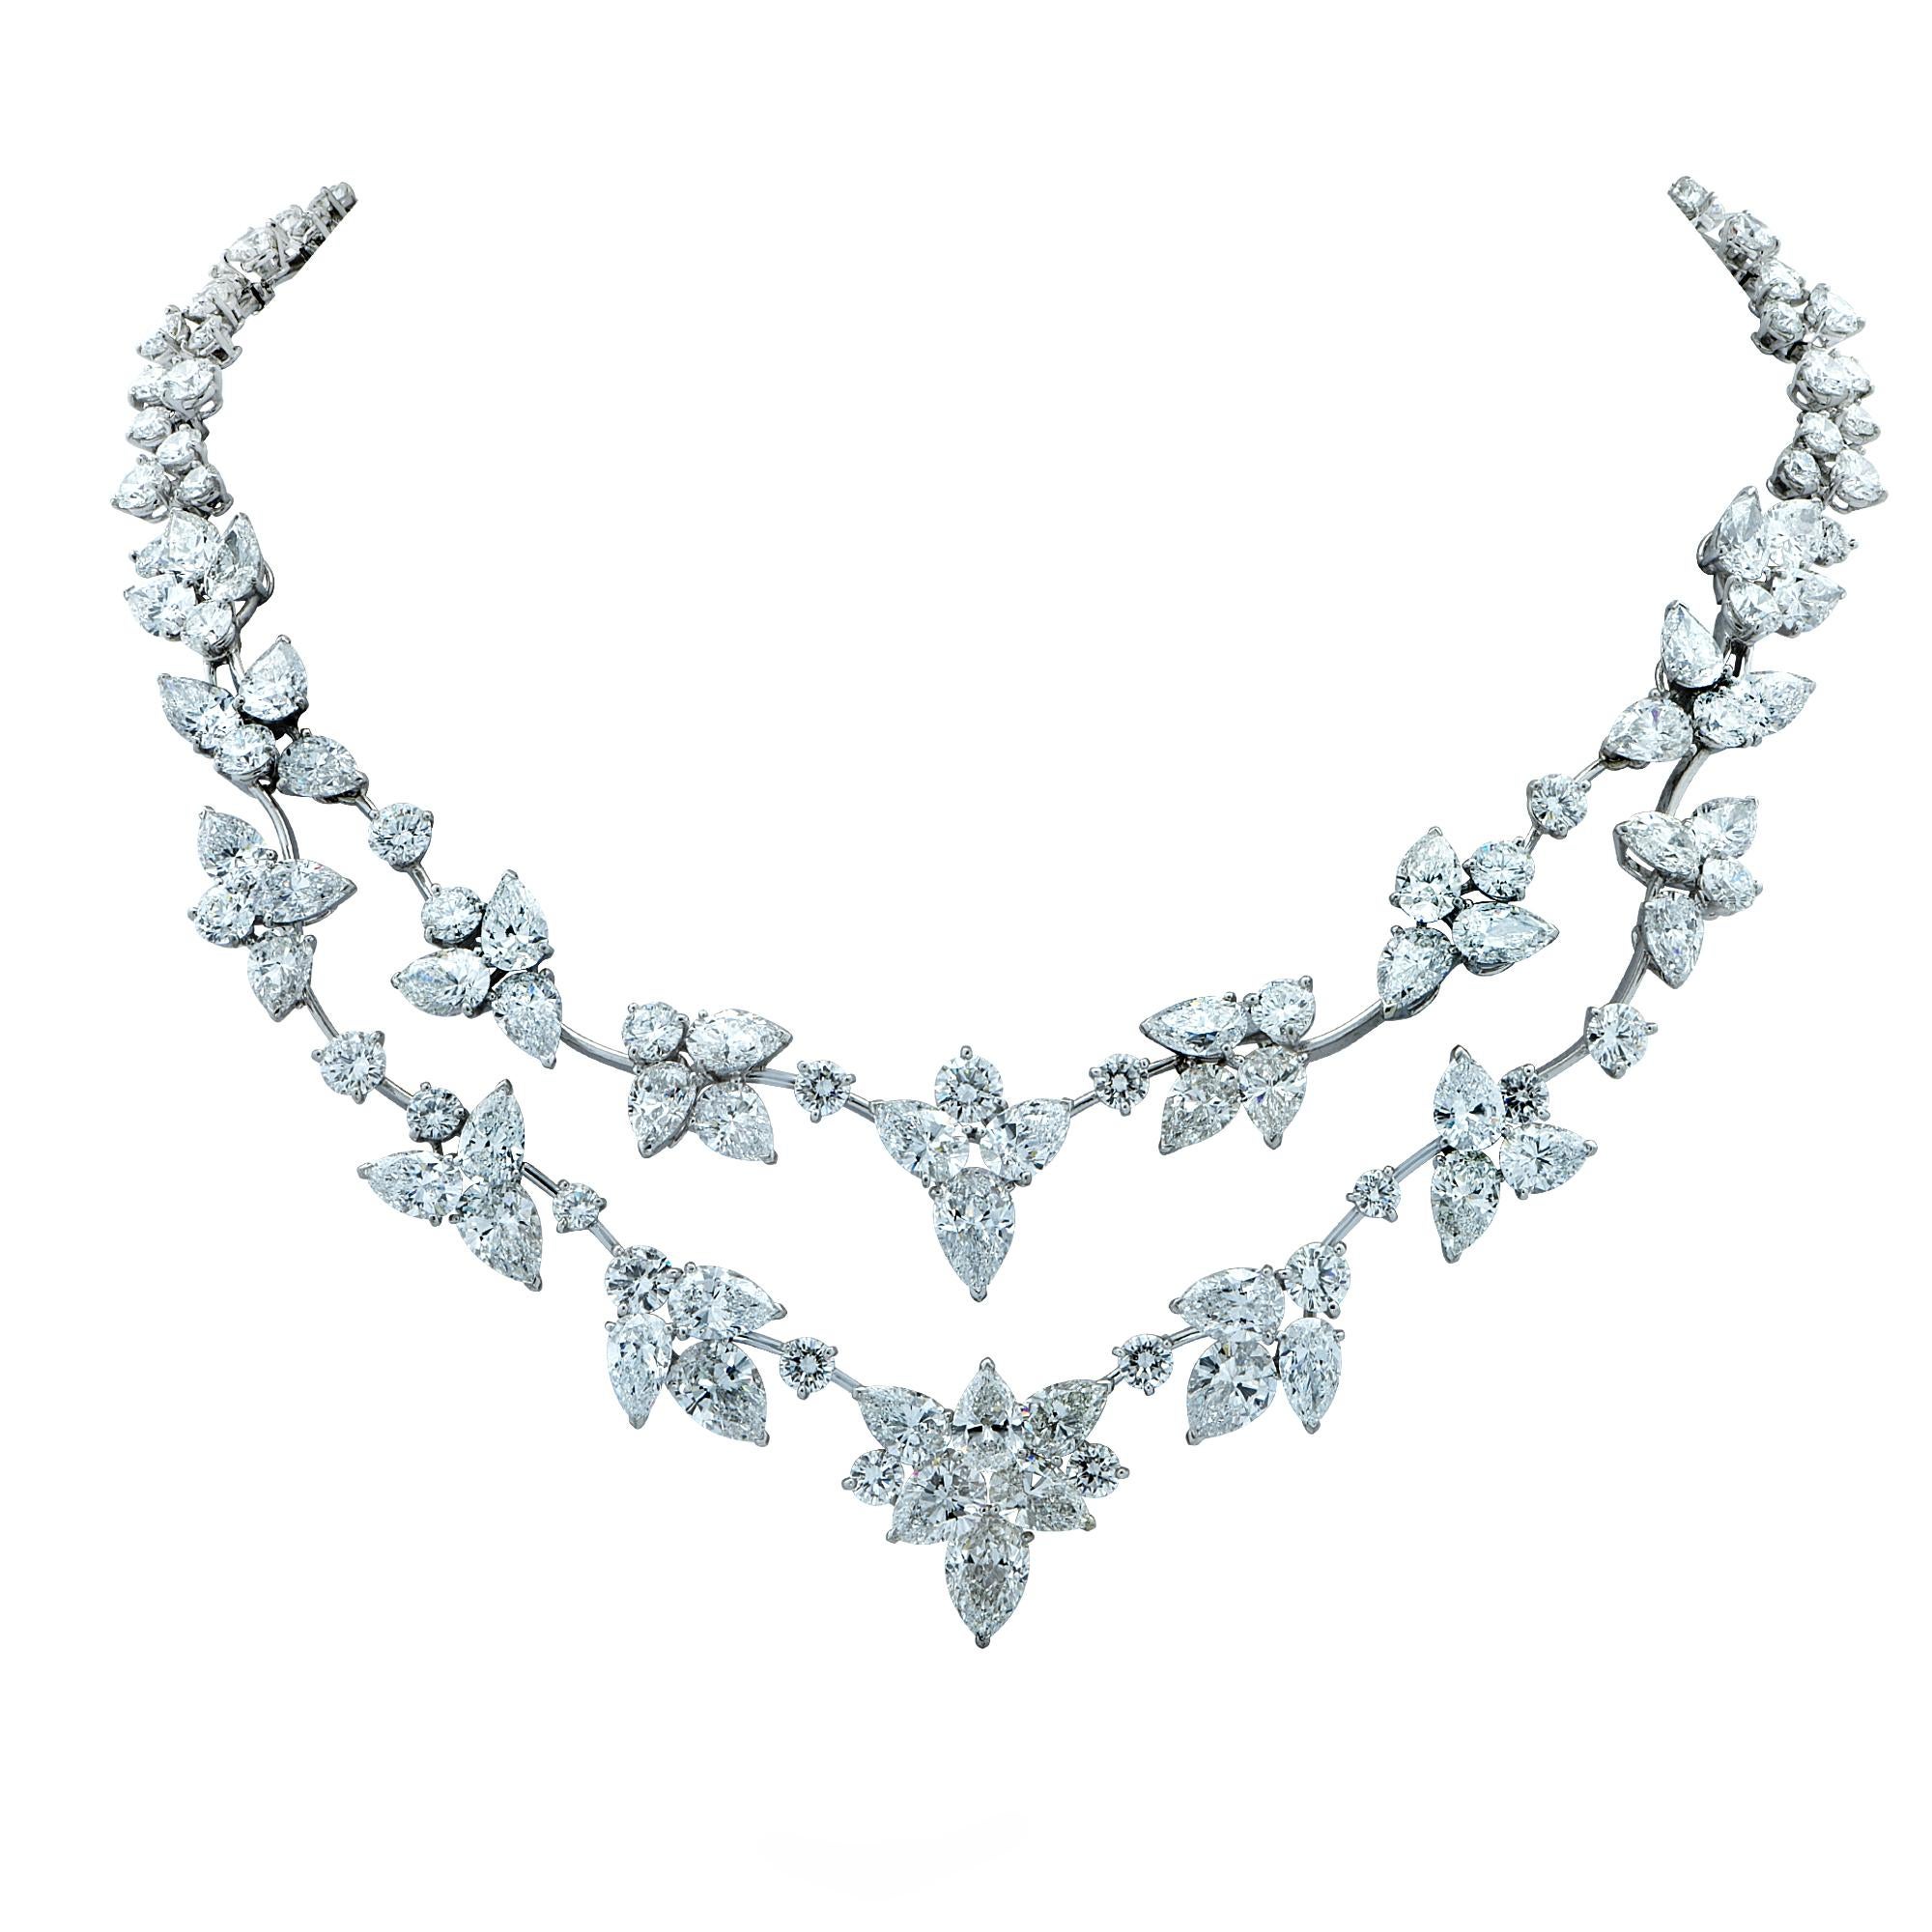 Breathtakingly beautiful diamond necklace crafted in Platinum showcasing a melange of collection diamonds weighing approximately 64.45 carats total weight. This stunning piece features 51 pear shaped diamonds weighing approximately 38.97 carats,